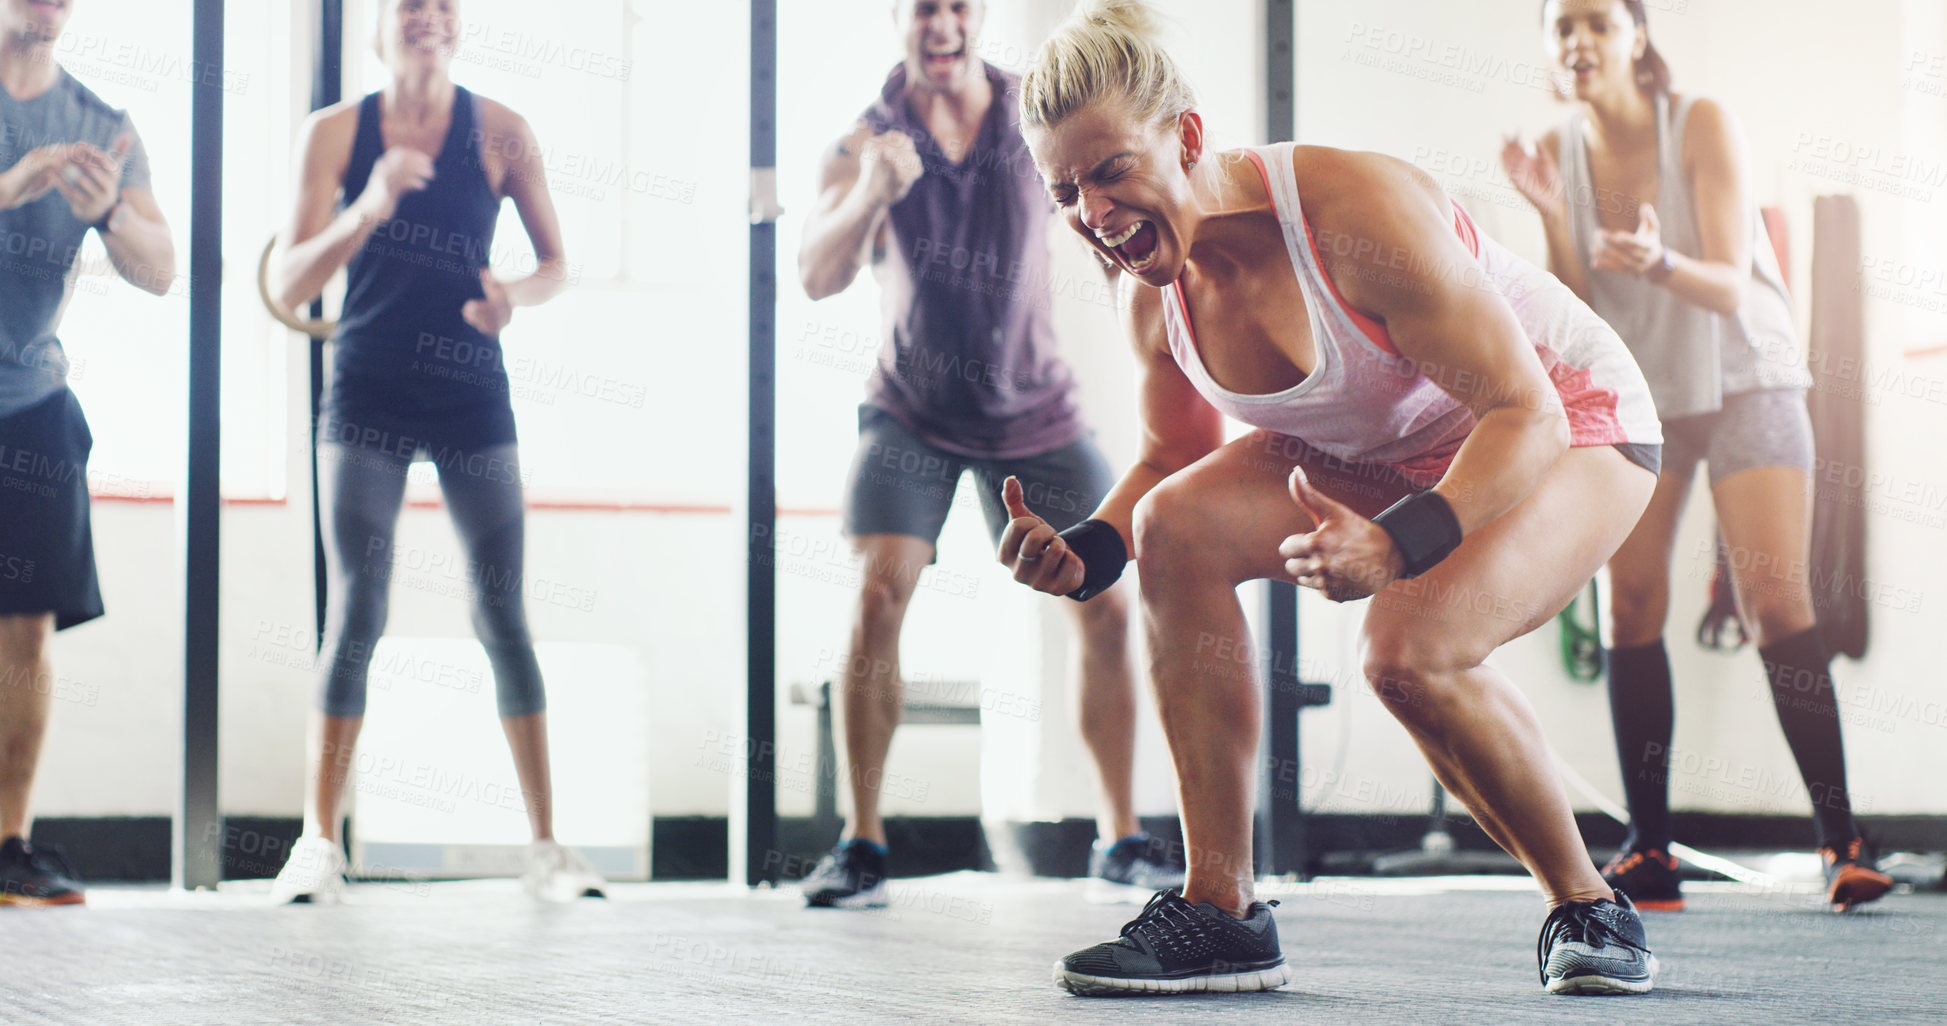 Buy stock photo Shot of a group of young people standing in a circle at the gym and motivating each other